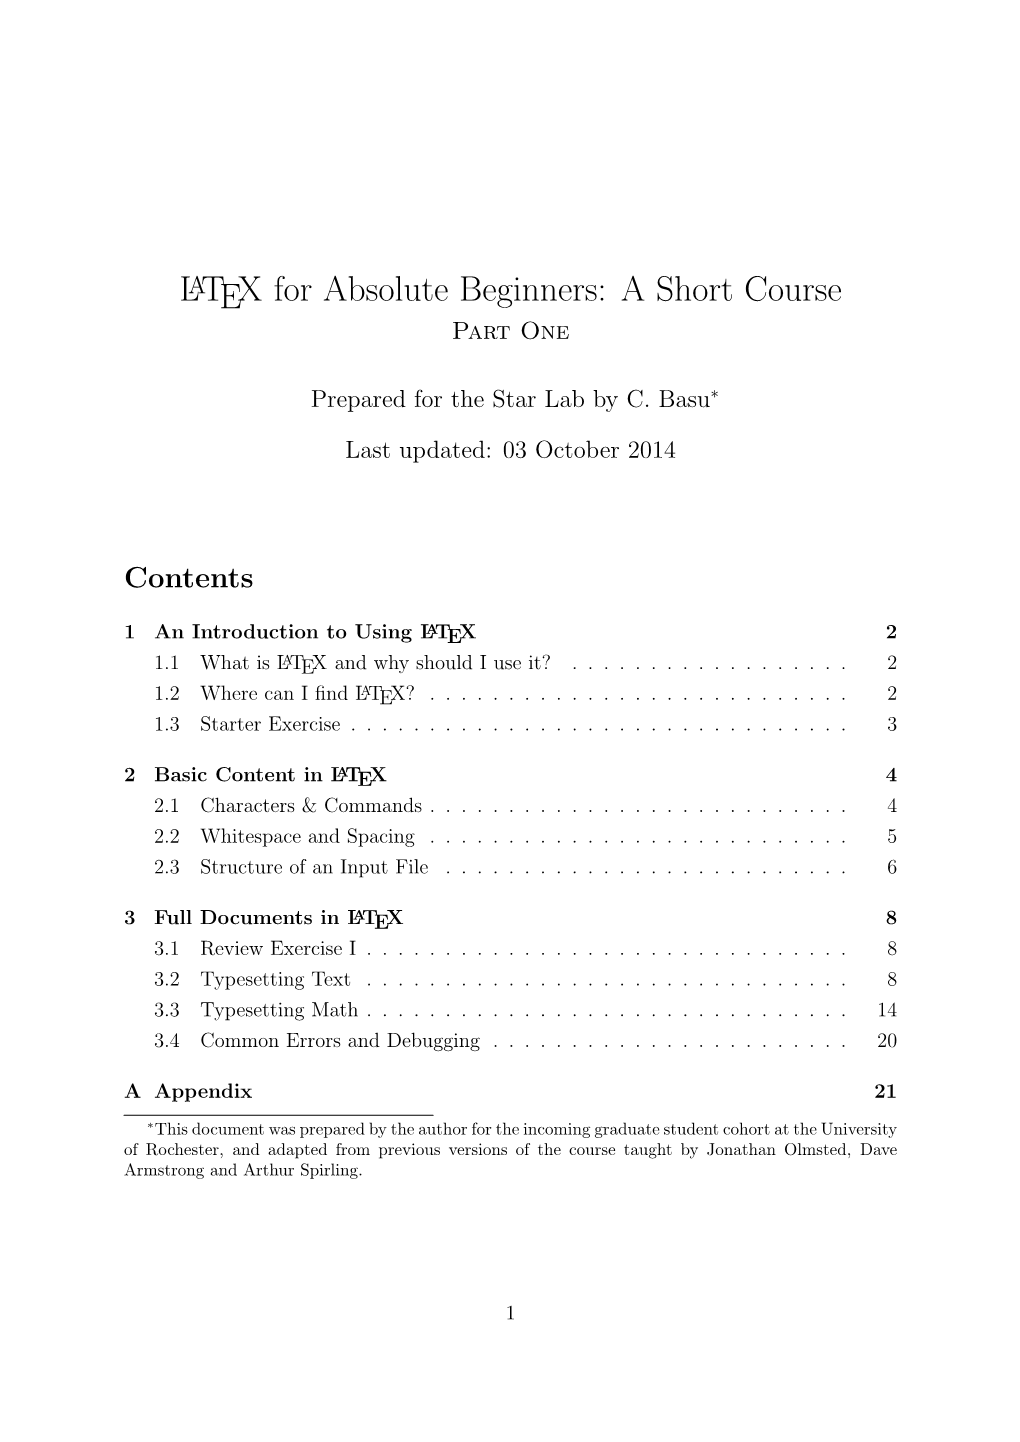 LATEX for Absolute Beginners: a Short Course Part One